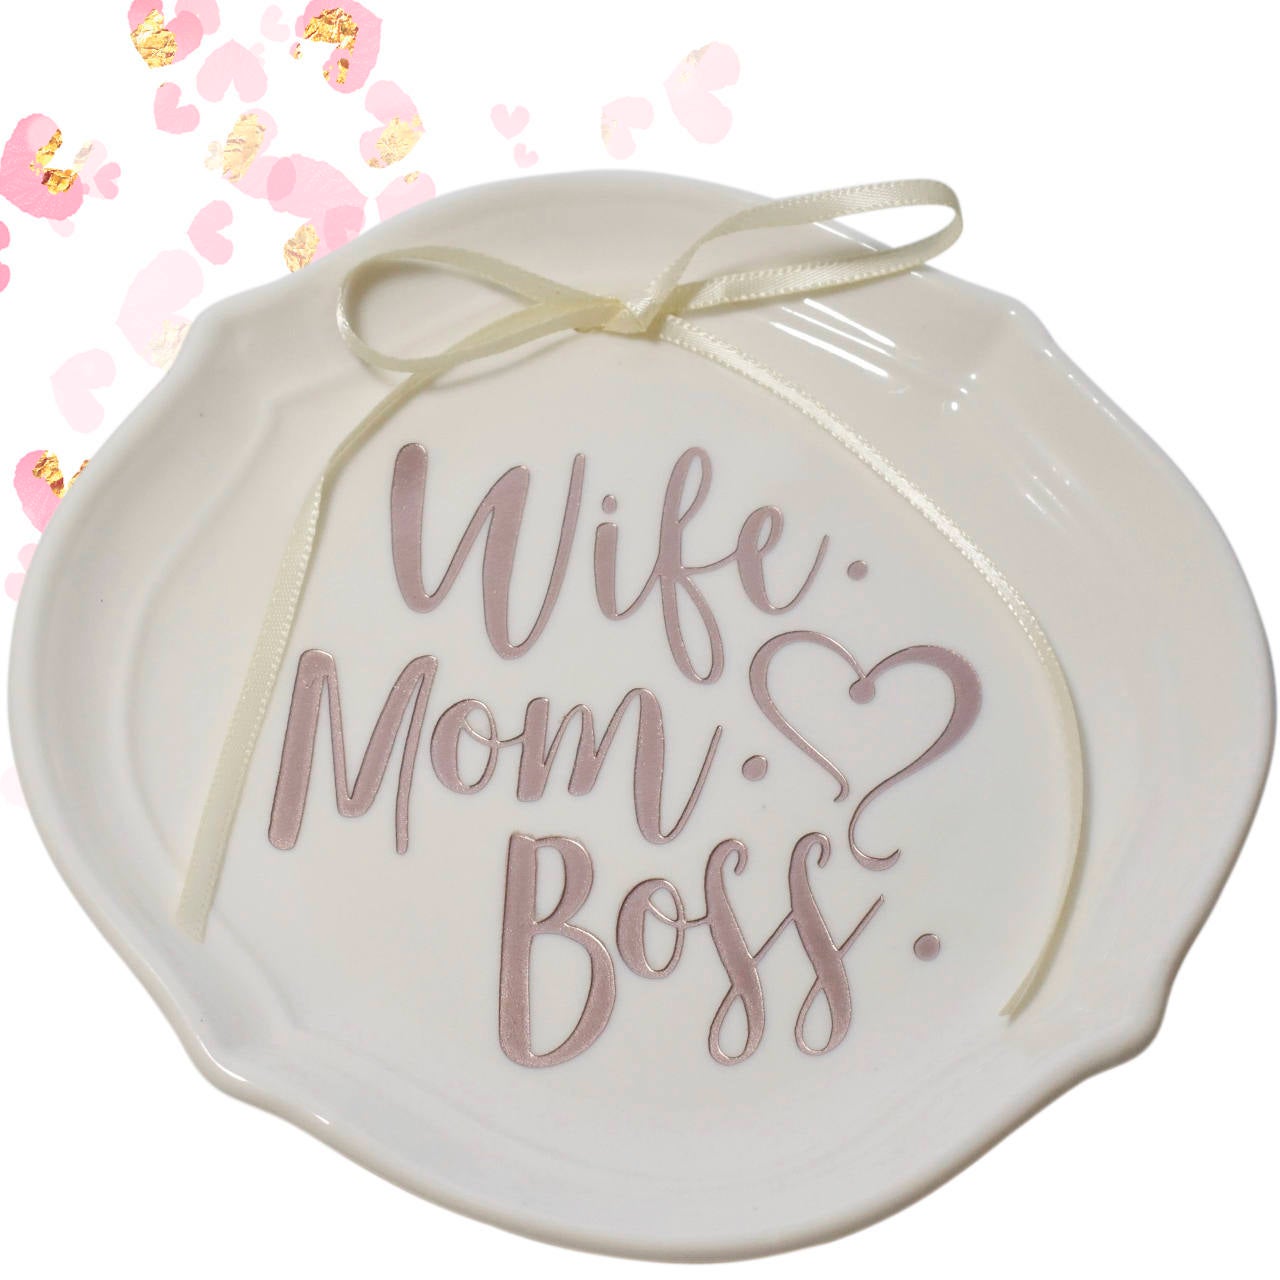 Wife Mom Boss Ring Dish, Trinket Dish, Mothers Day Gift, Boss Mom, Gift for Her, Rose Gold, Gift for Mom, Gift for Mom, Girlfriend Gift,